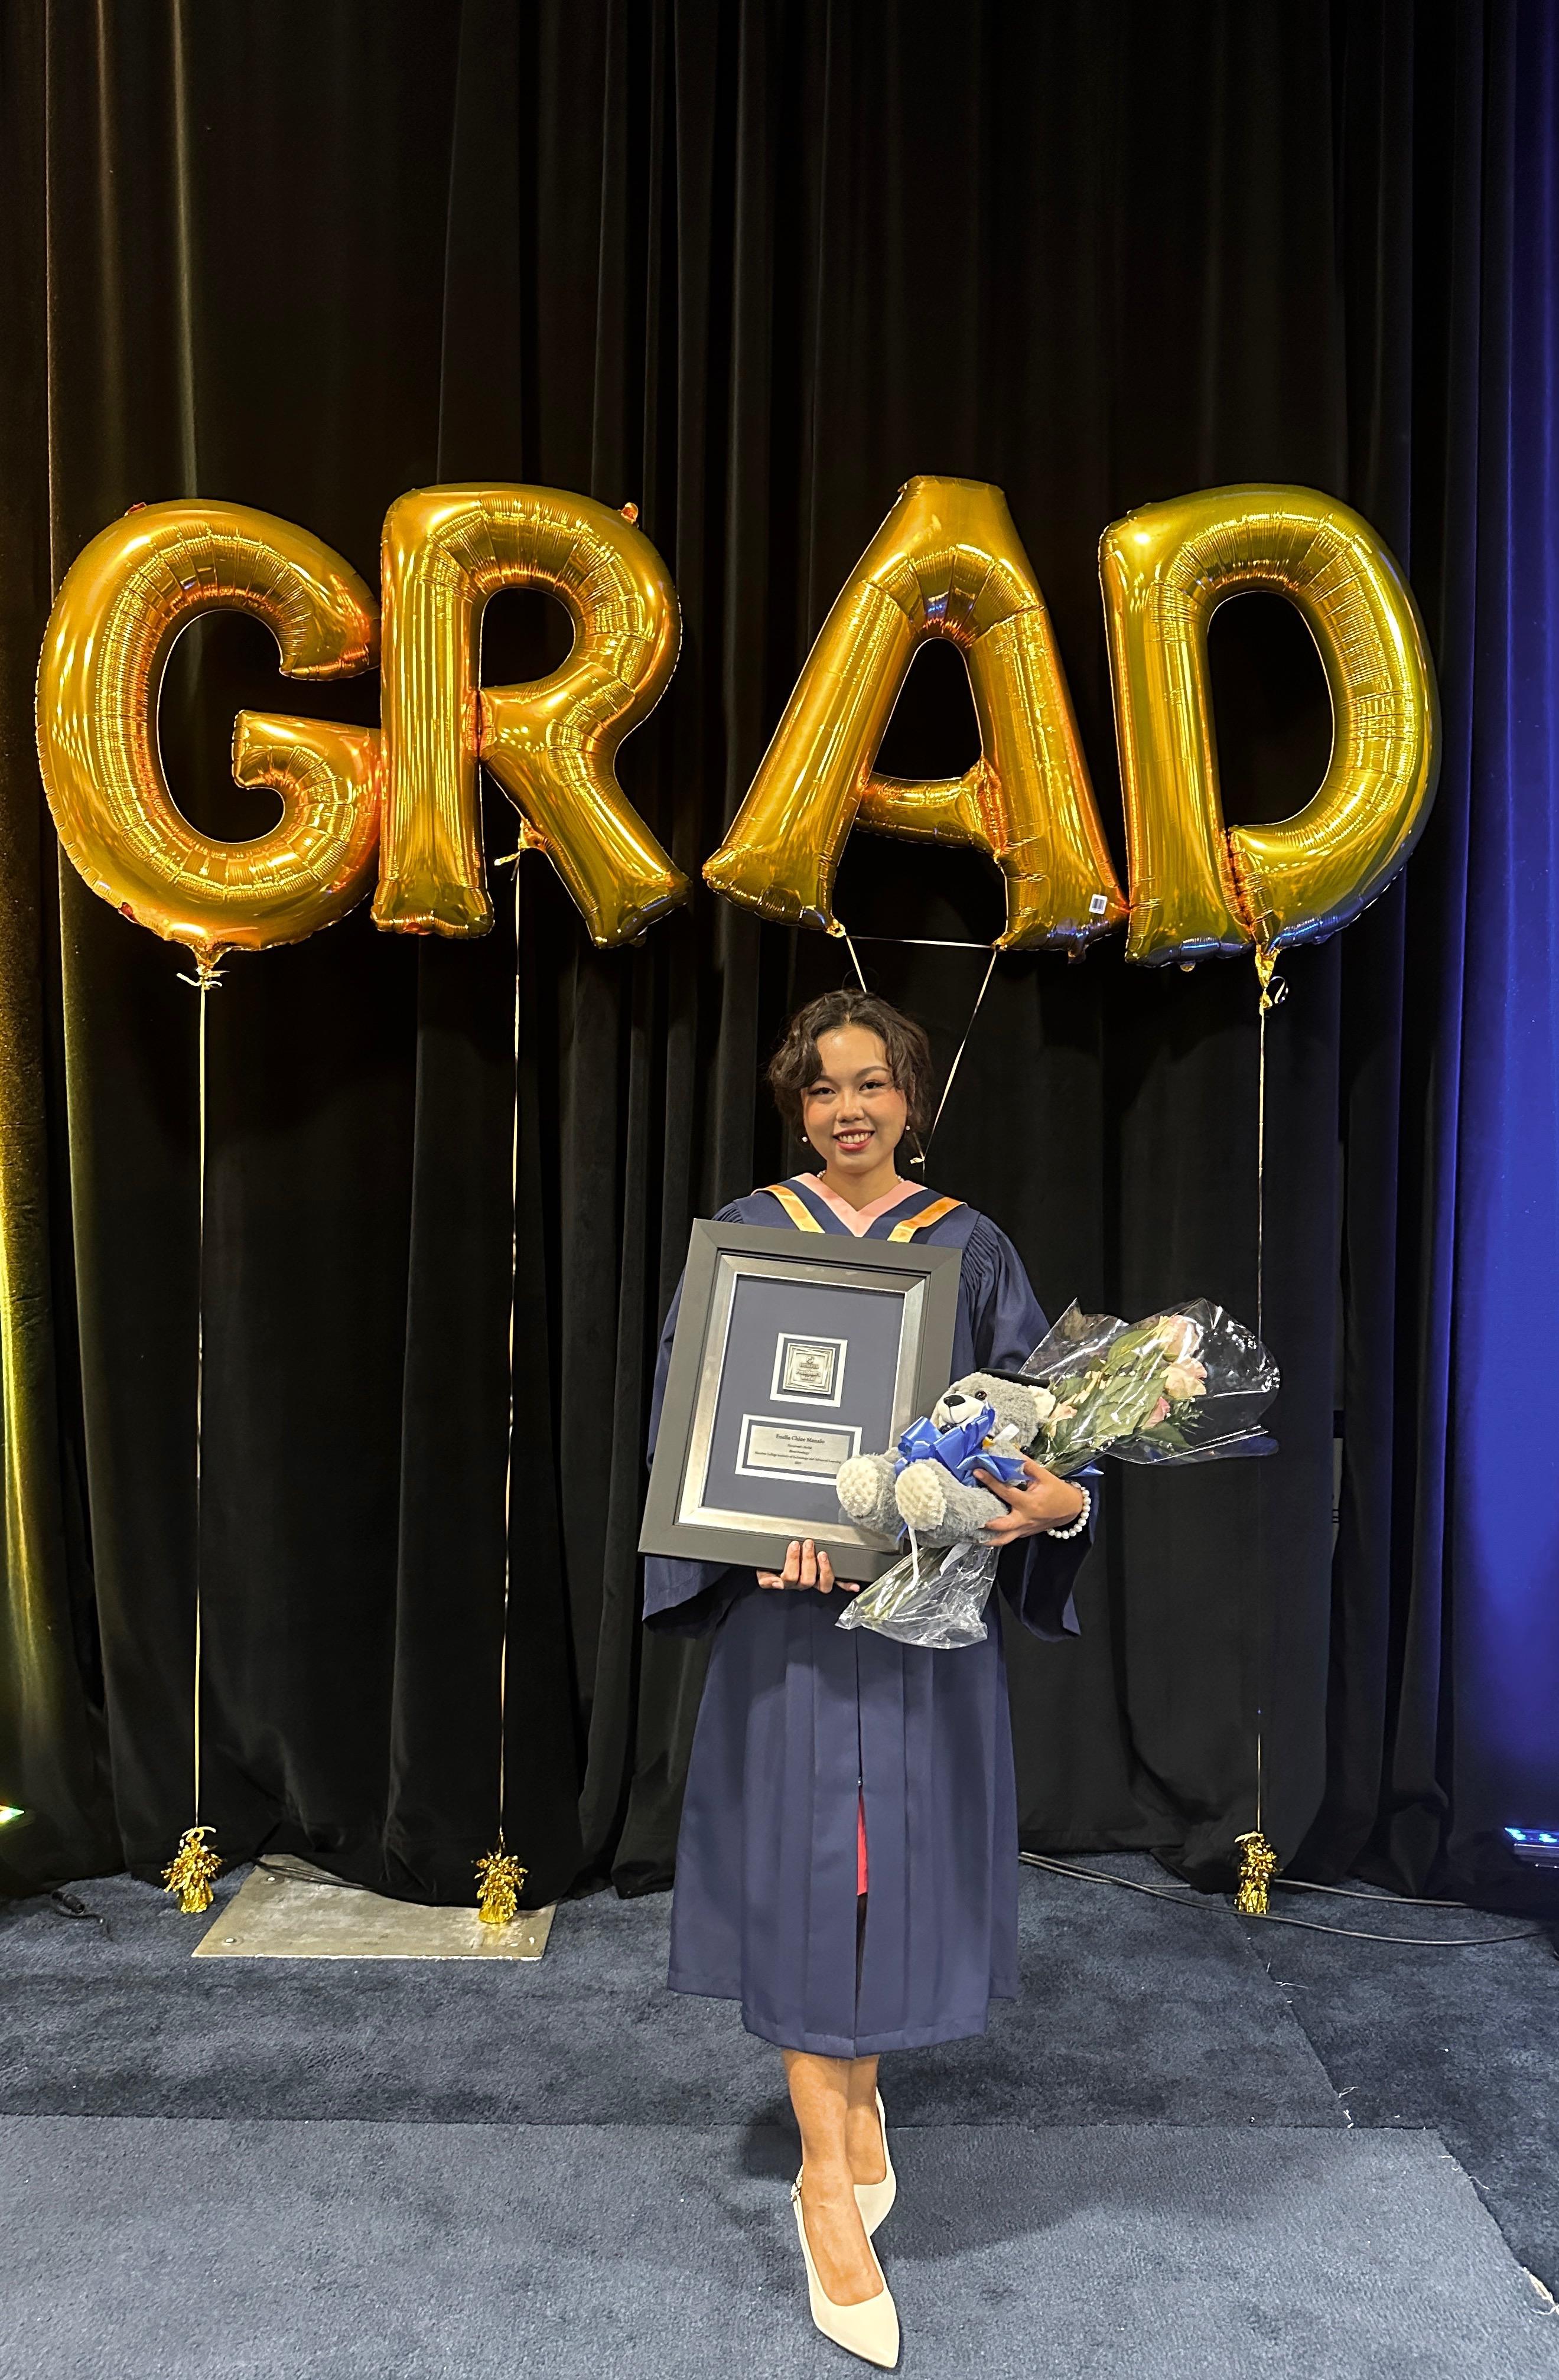 A person wearing a convocation gown holds flowers and a plaque while standing beneath balloons that spell out grad.